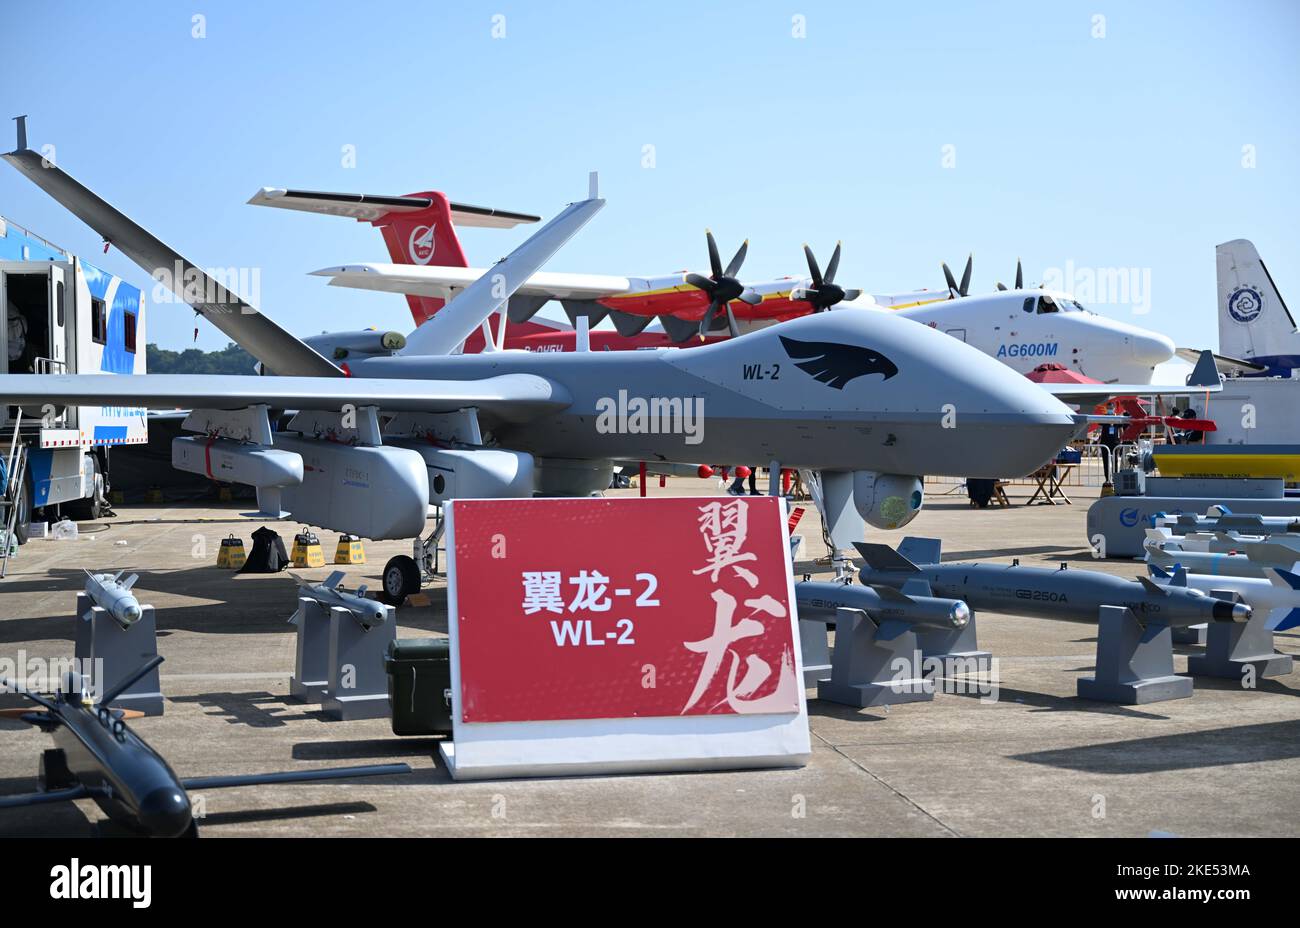 Zhuhai. 9th Nov, 2022. This photo taken on Nov. 9, 2022 shows a WL-2 unmanned aerial vehicle (UAV) displayed at the 14th China International Aviation and Aerospace Exhibition, also known as Airshow China, in the port city of Zhuhai, south China's Guangdong Province. A range of China's homegrown unmanned aerial vehicles (UAVs) and anti-drone system are showcased at the 14th Airshow China. Credit: Deng Hua/Xinhua/Alamy Live News Stock Photo